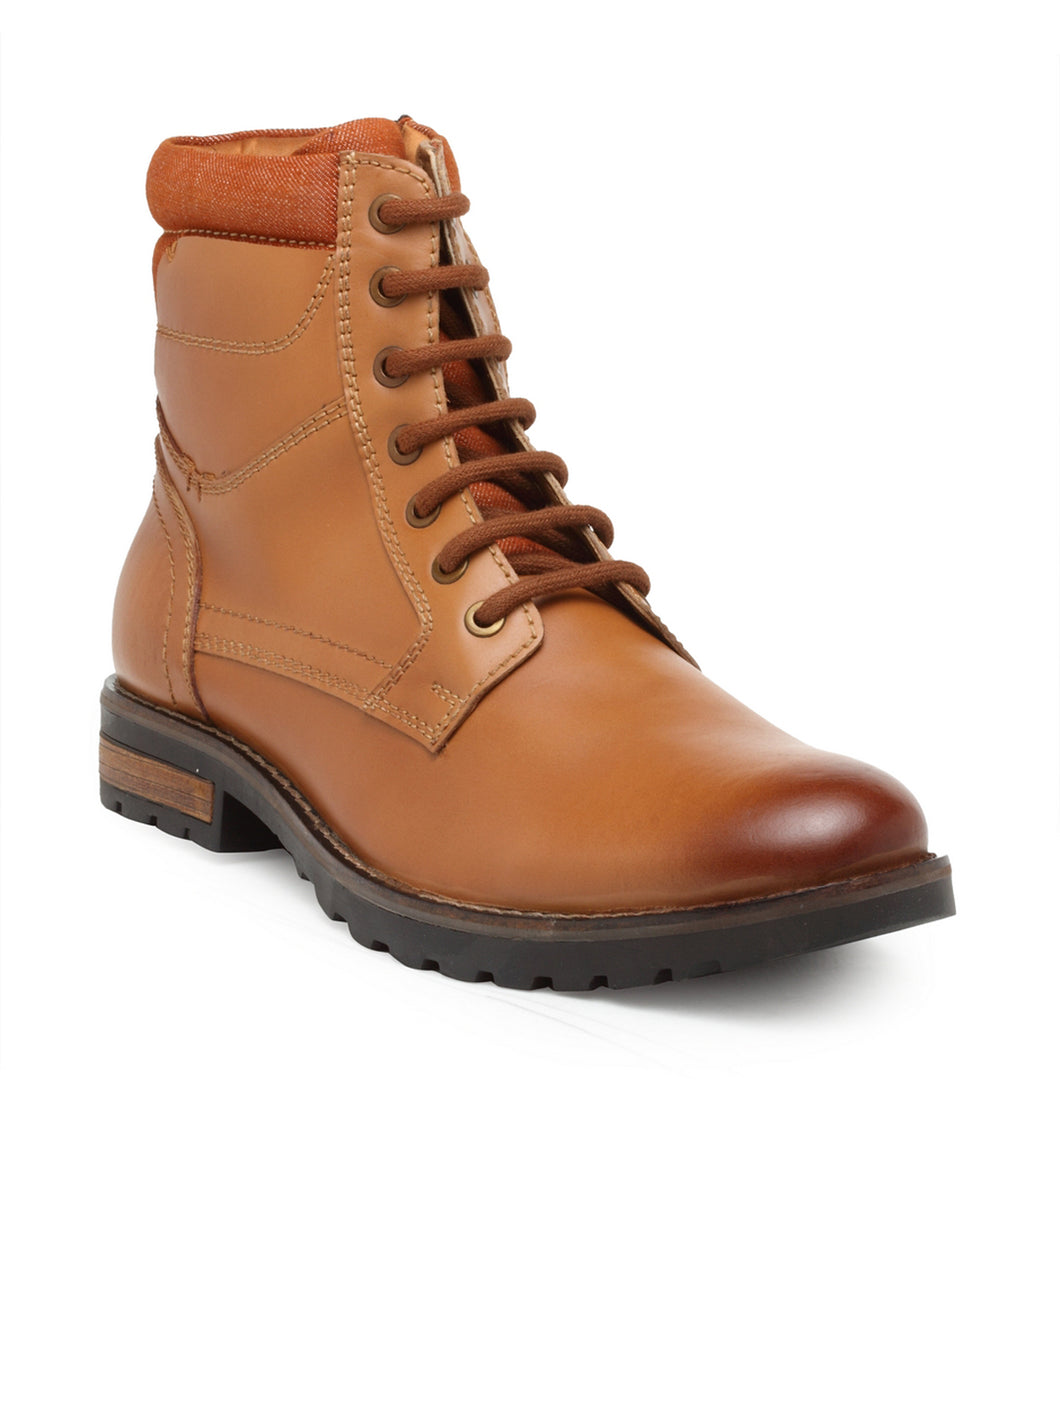 Teakwood Leathers Men's Tan Casual Ankle Lace-Up Boots